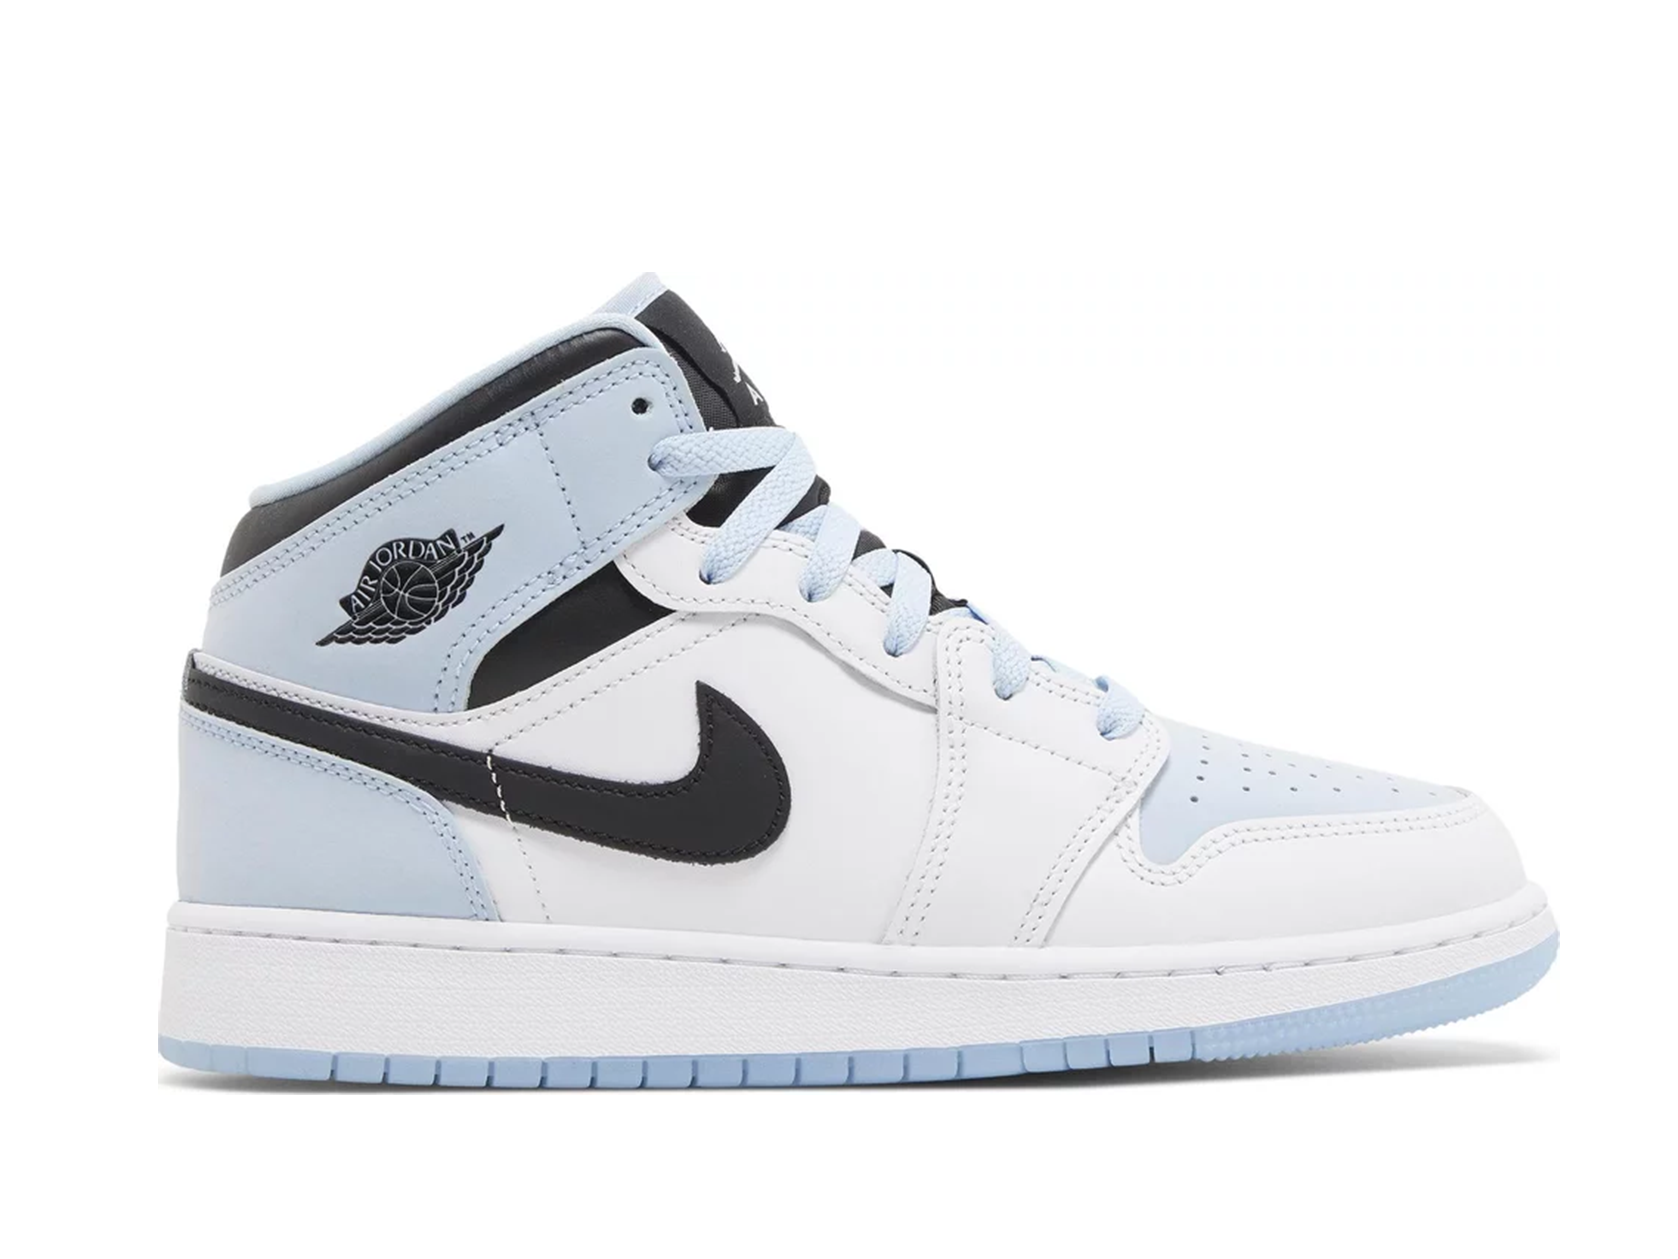 Double Boxed  149.99 Nike Air Jordan 1 Mid White Ice Blue Double Boxed